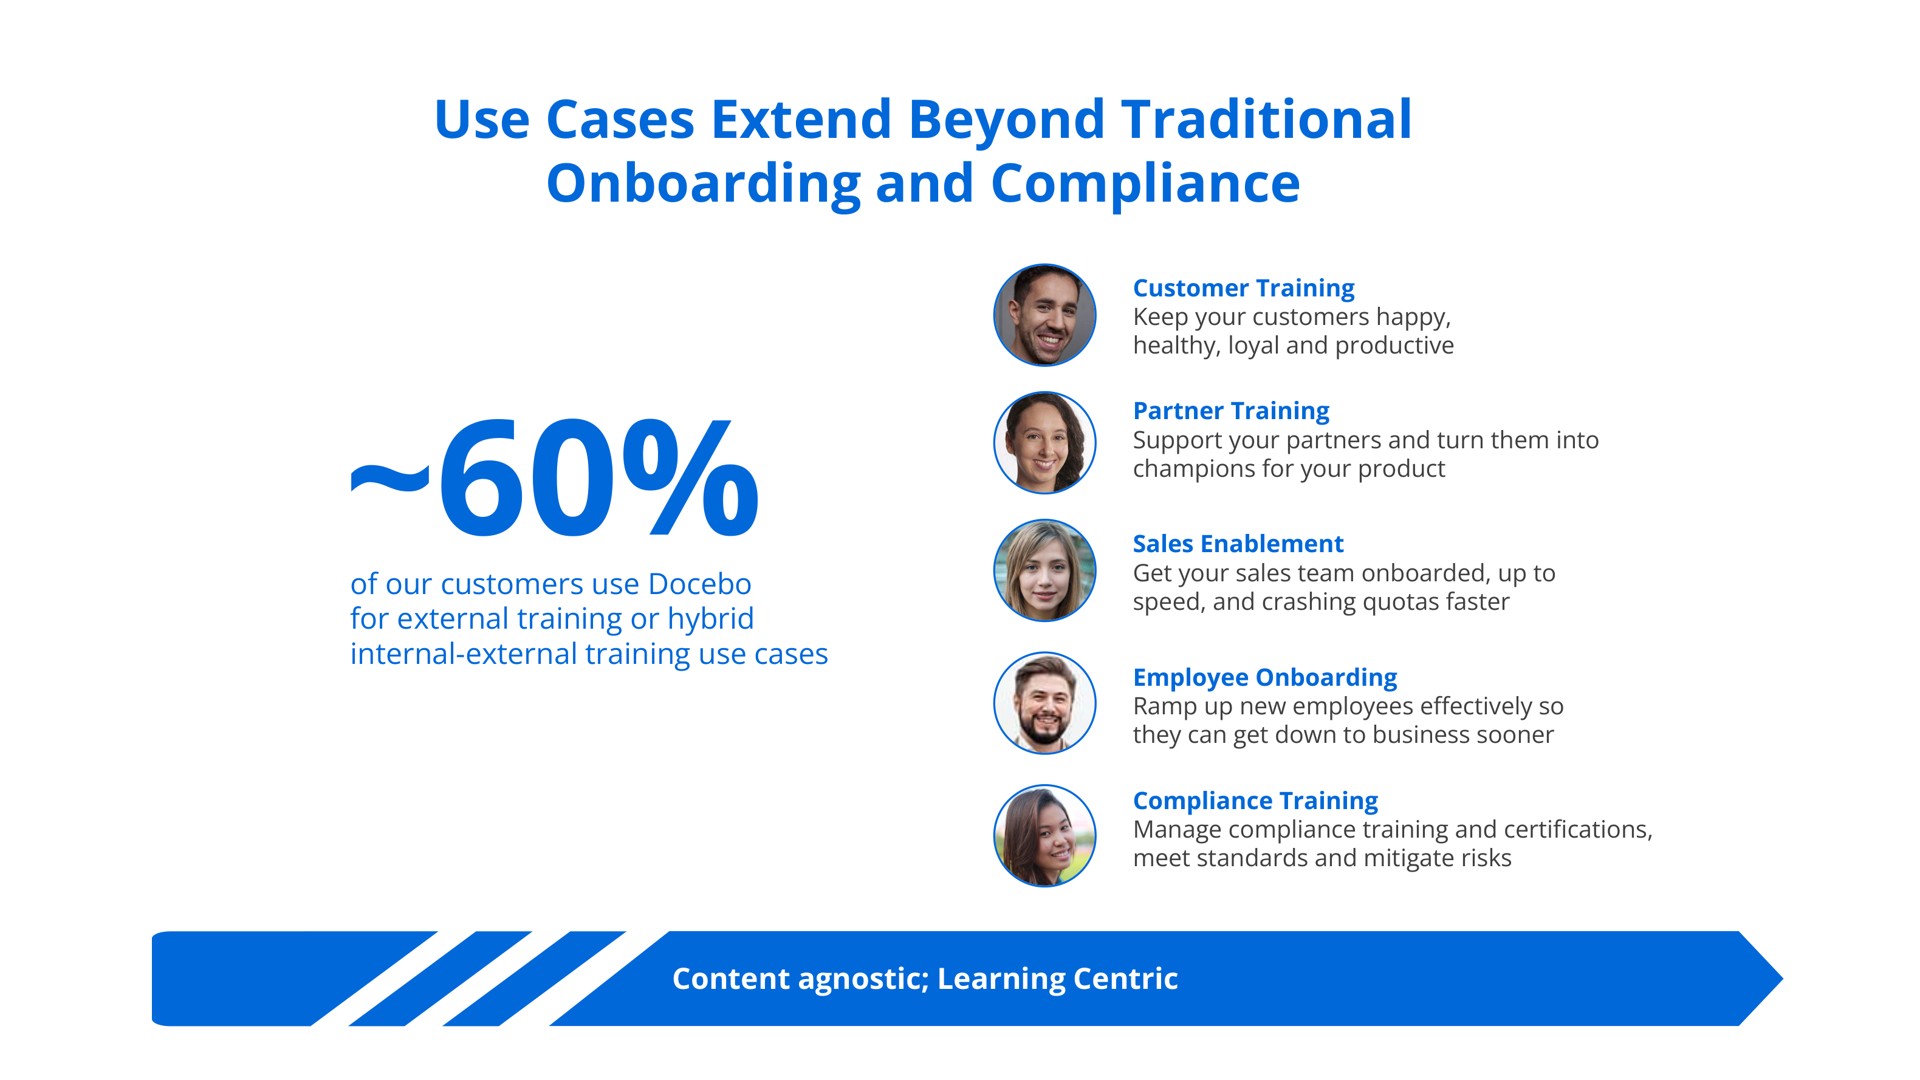 use cases extend beyond traditional and compliance | Docebo